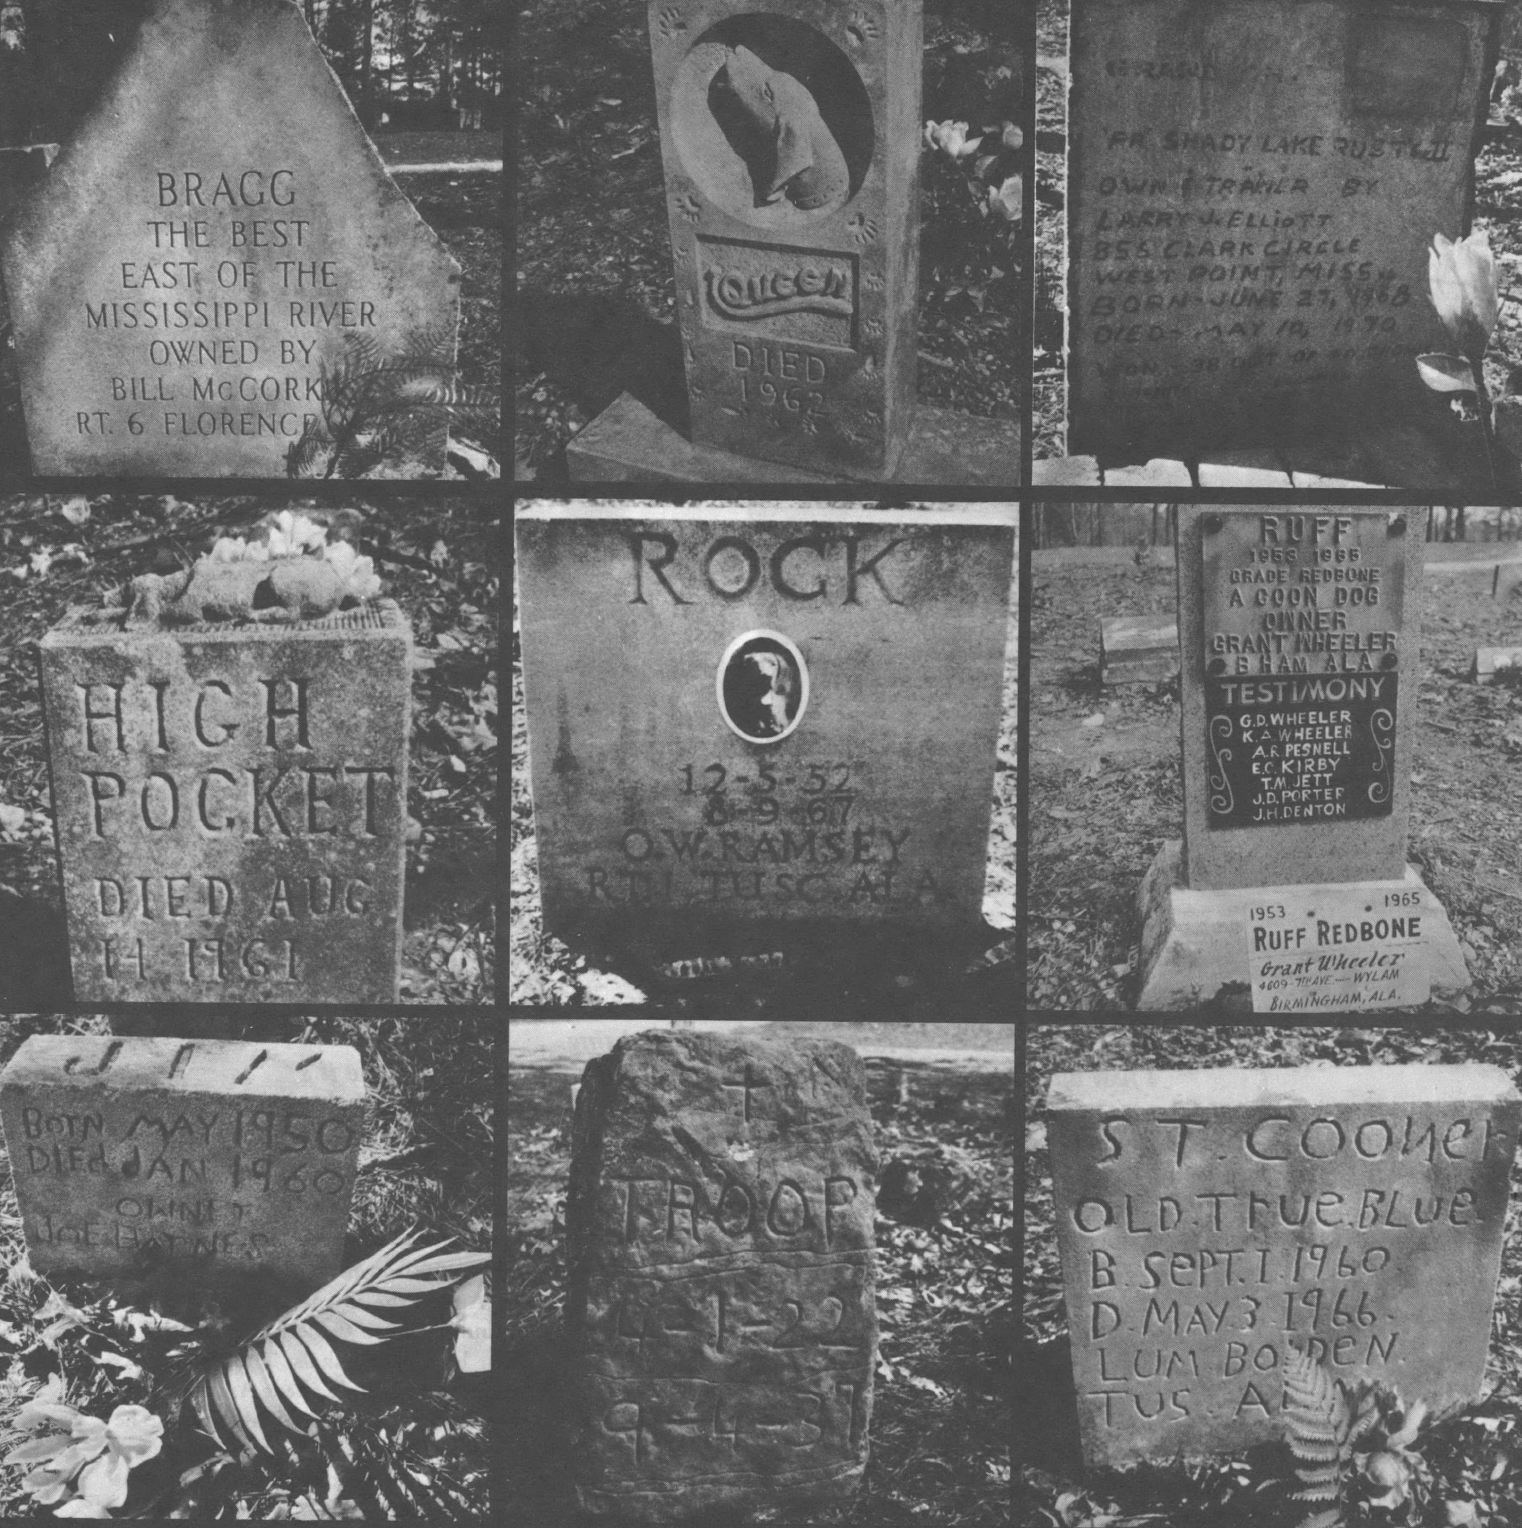 Black and white photo collage showing gravestones for hunting dogs